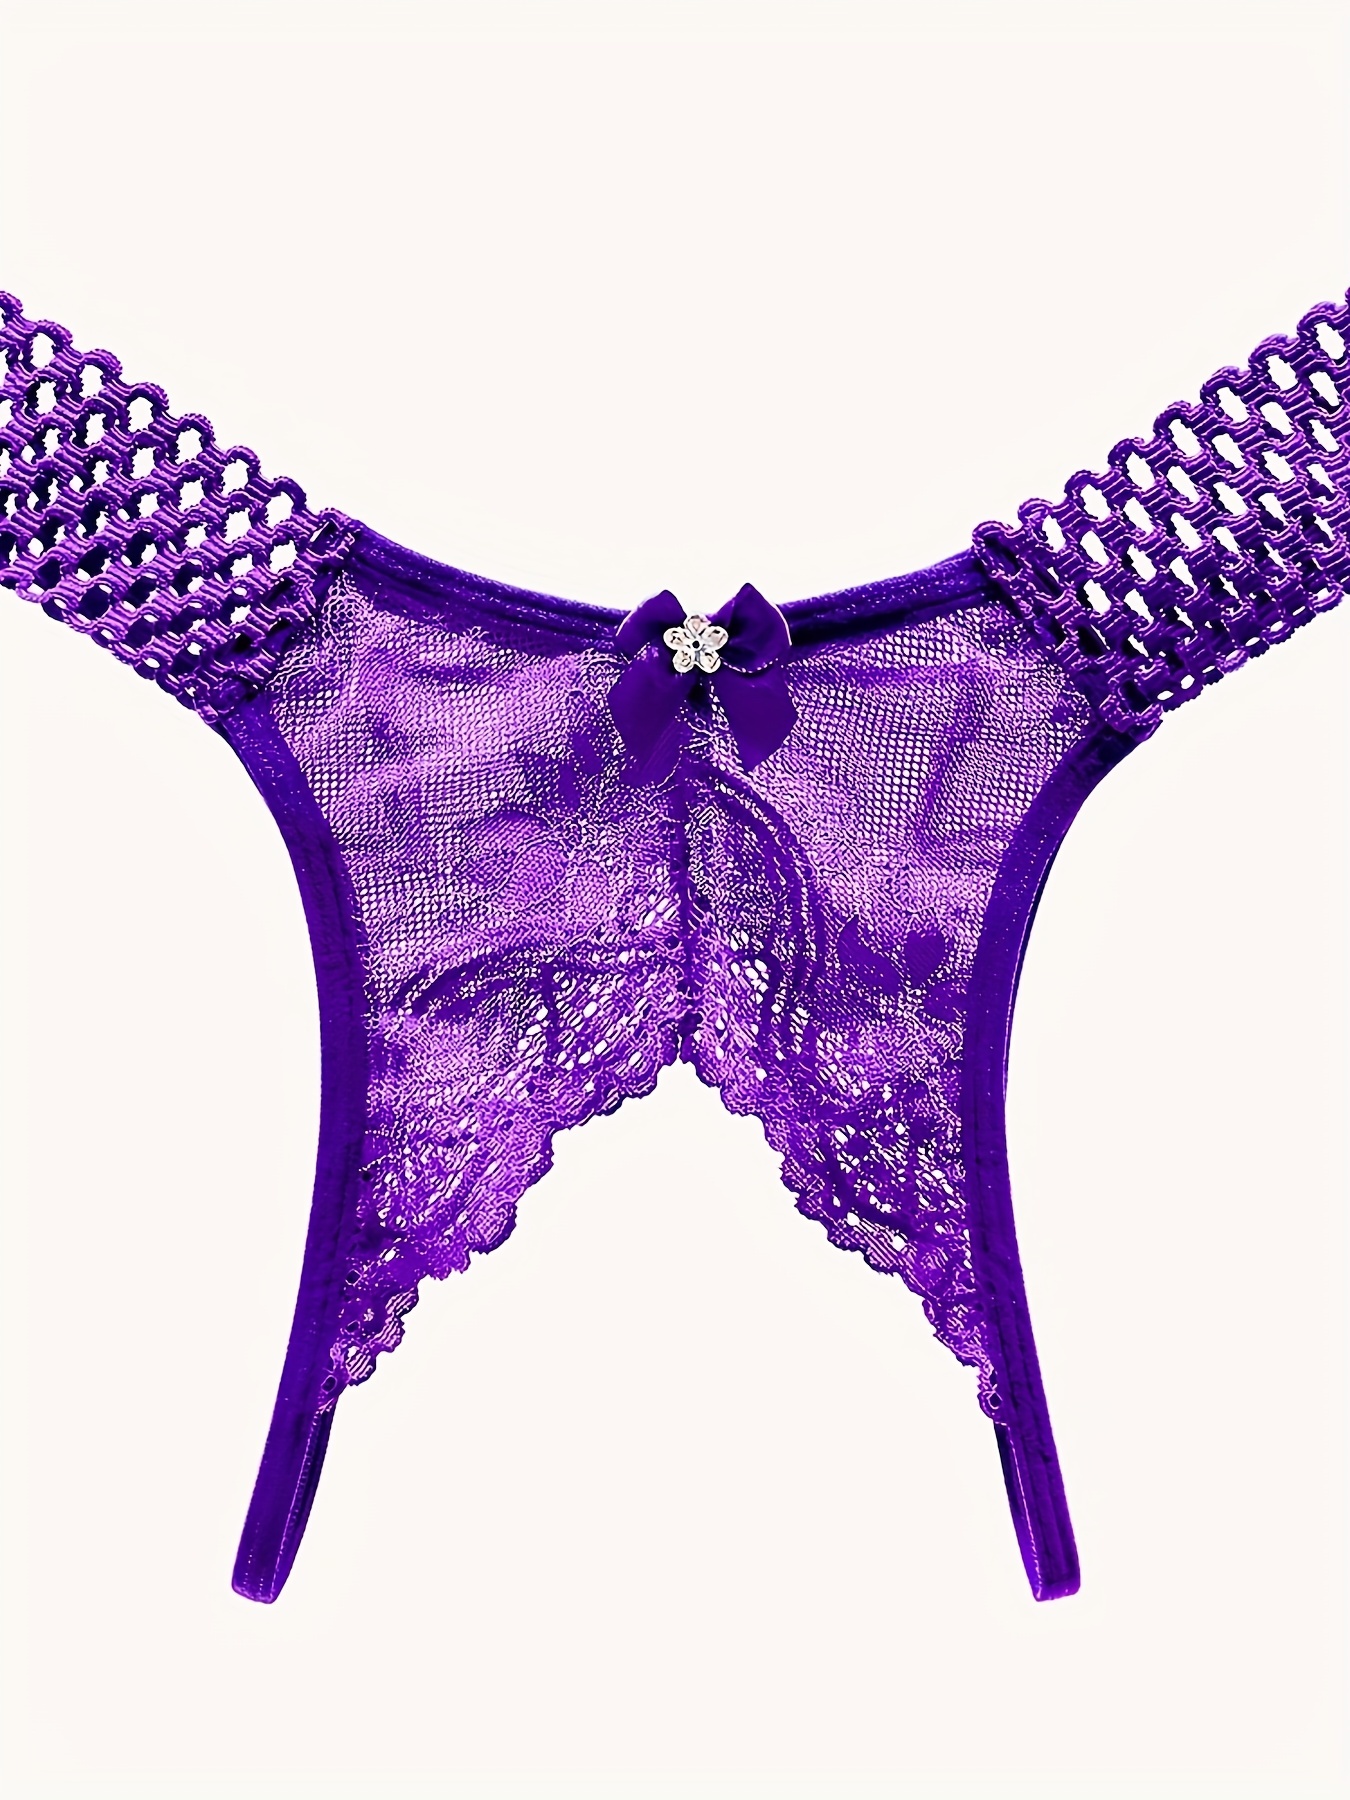 Crotchless Thong Panties in Soft Purple Stretch Lace 